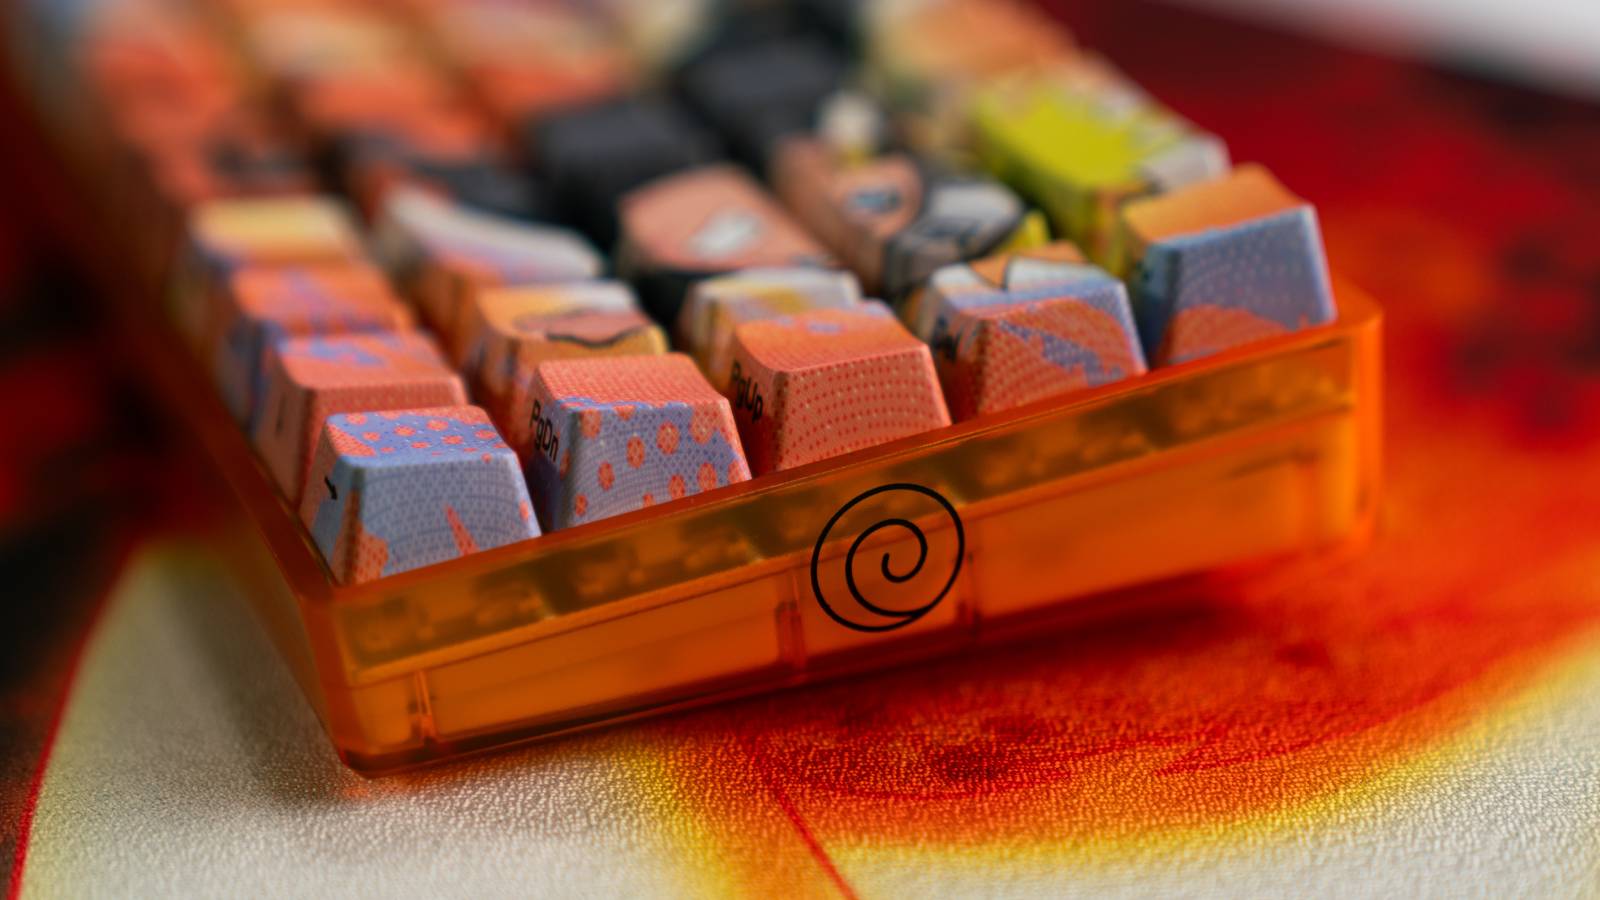 Image of the Naruto x Higround collab keyboard.